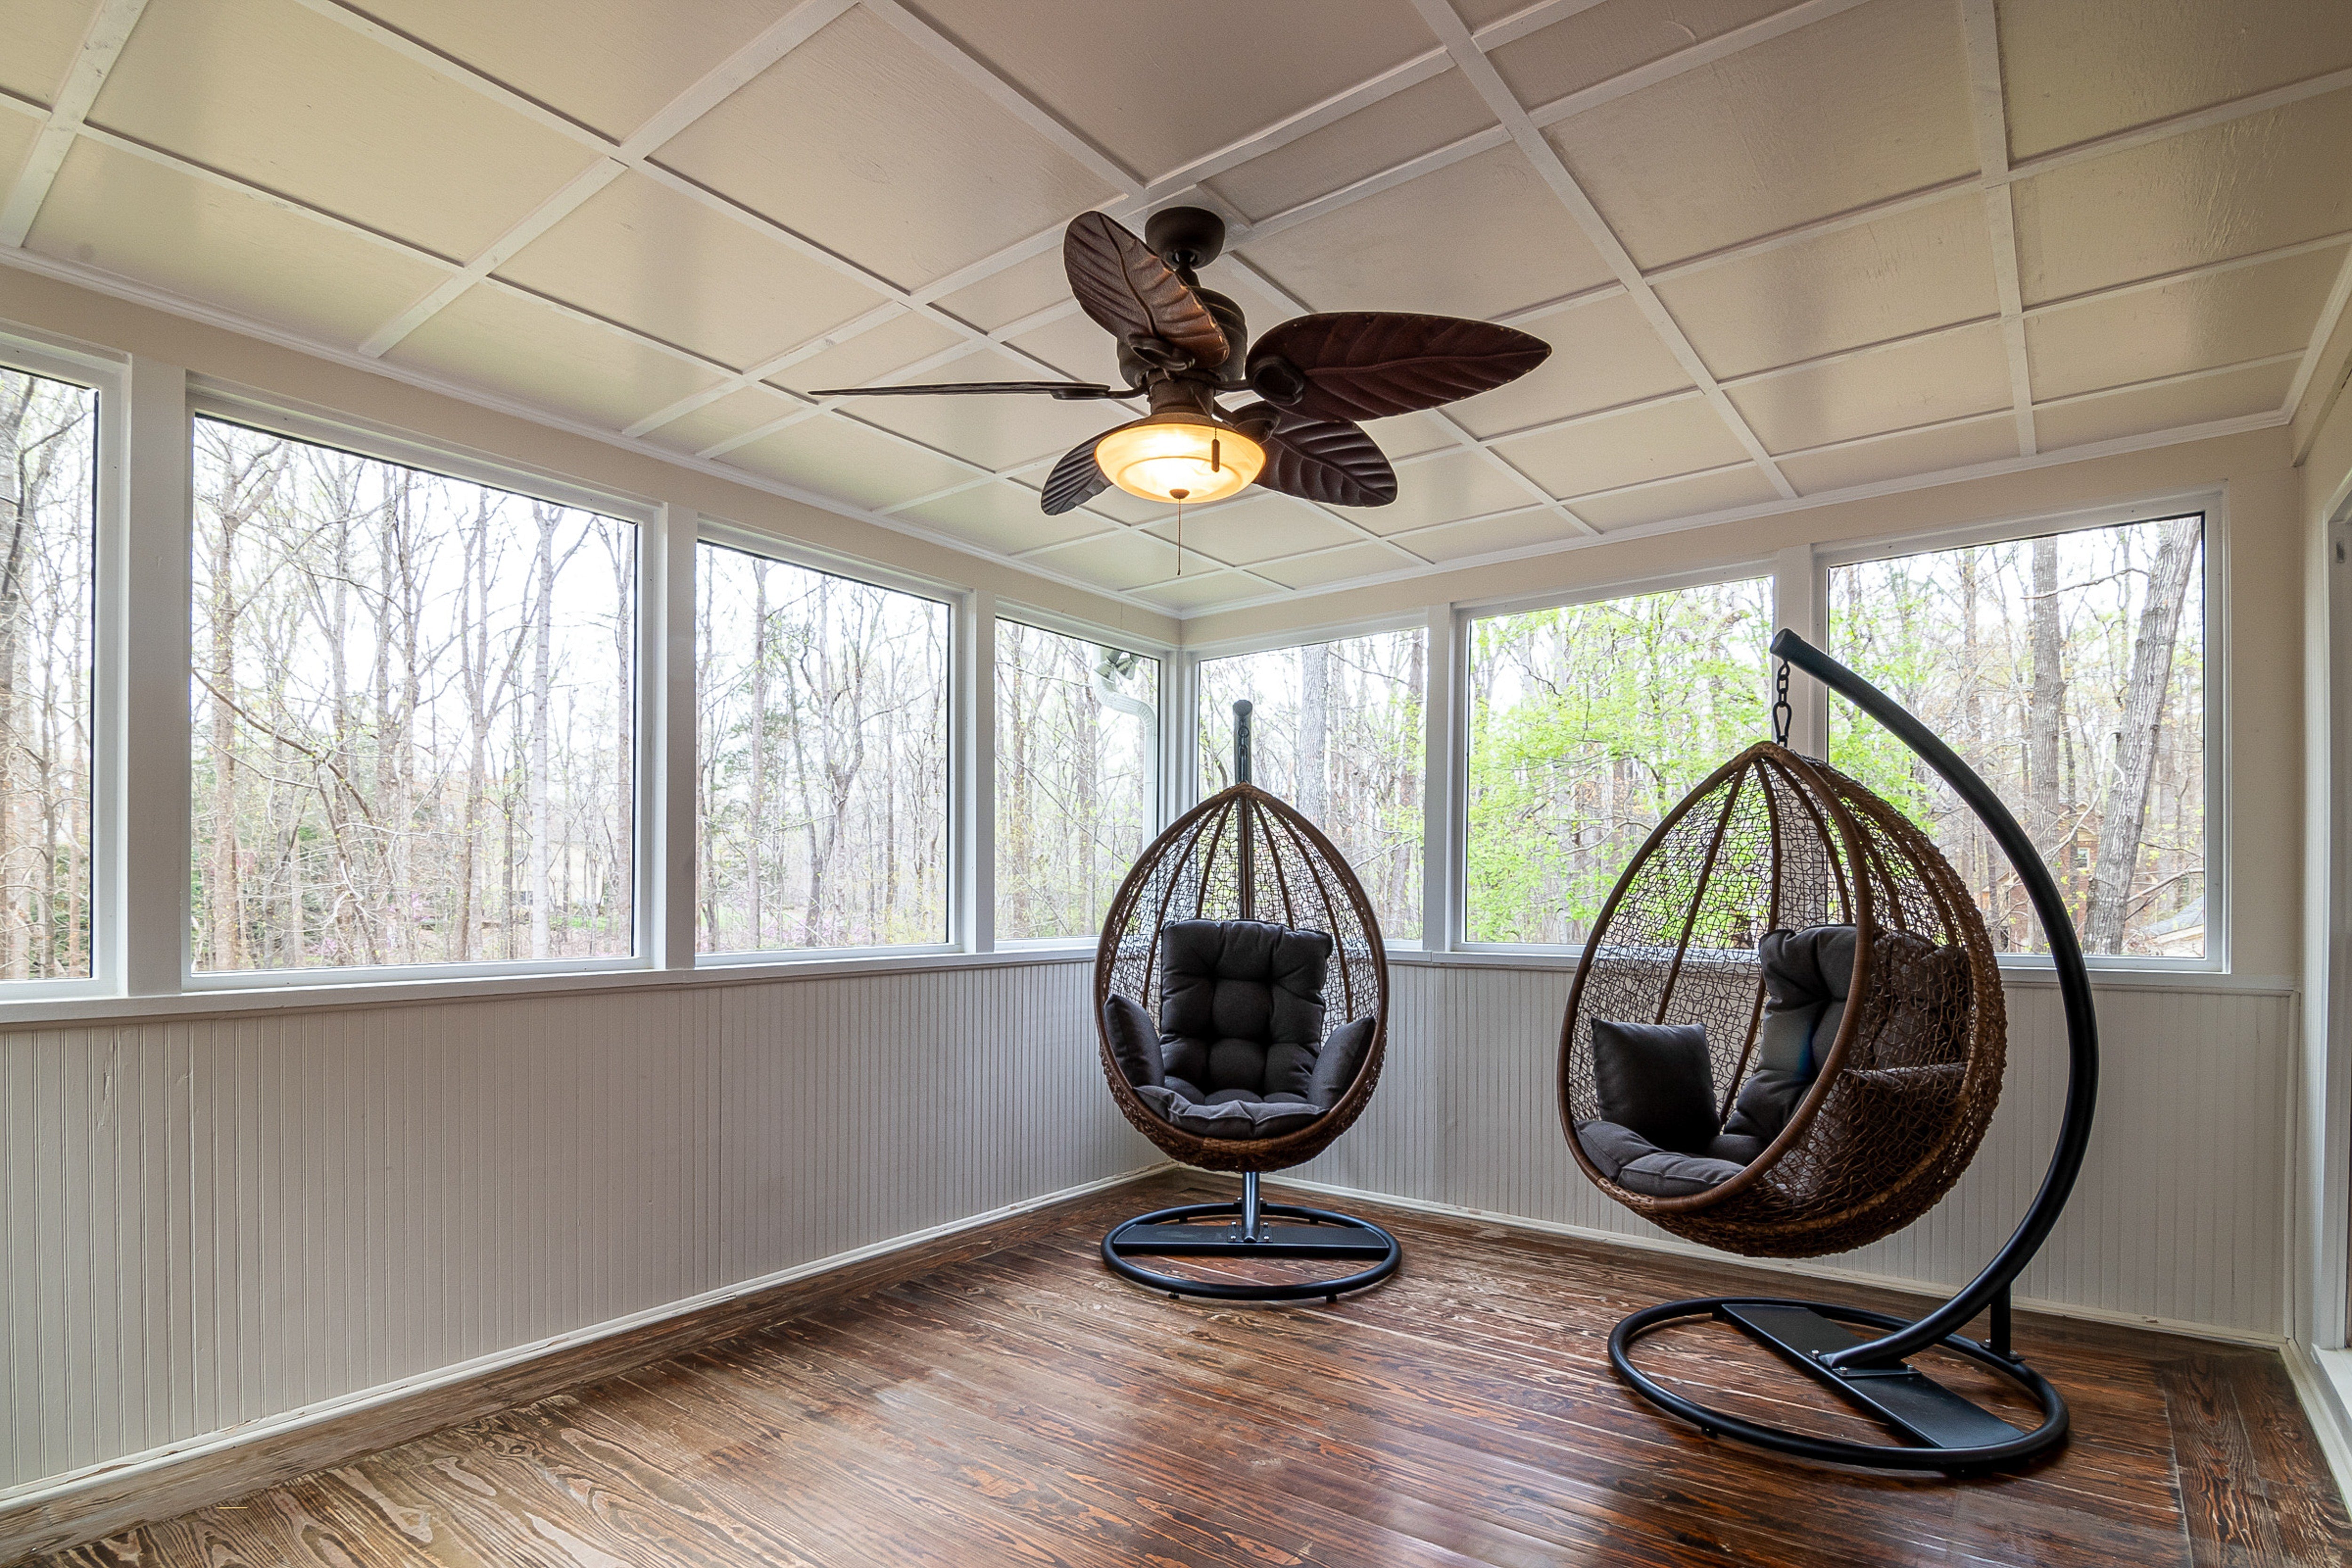 Say Goodbye to Ugly Ceiling Fans